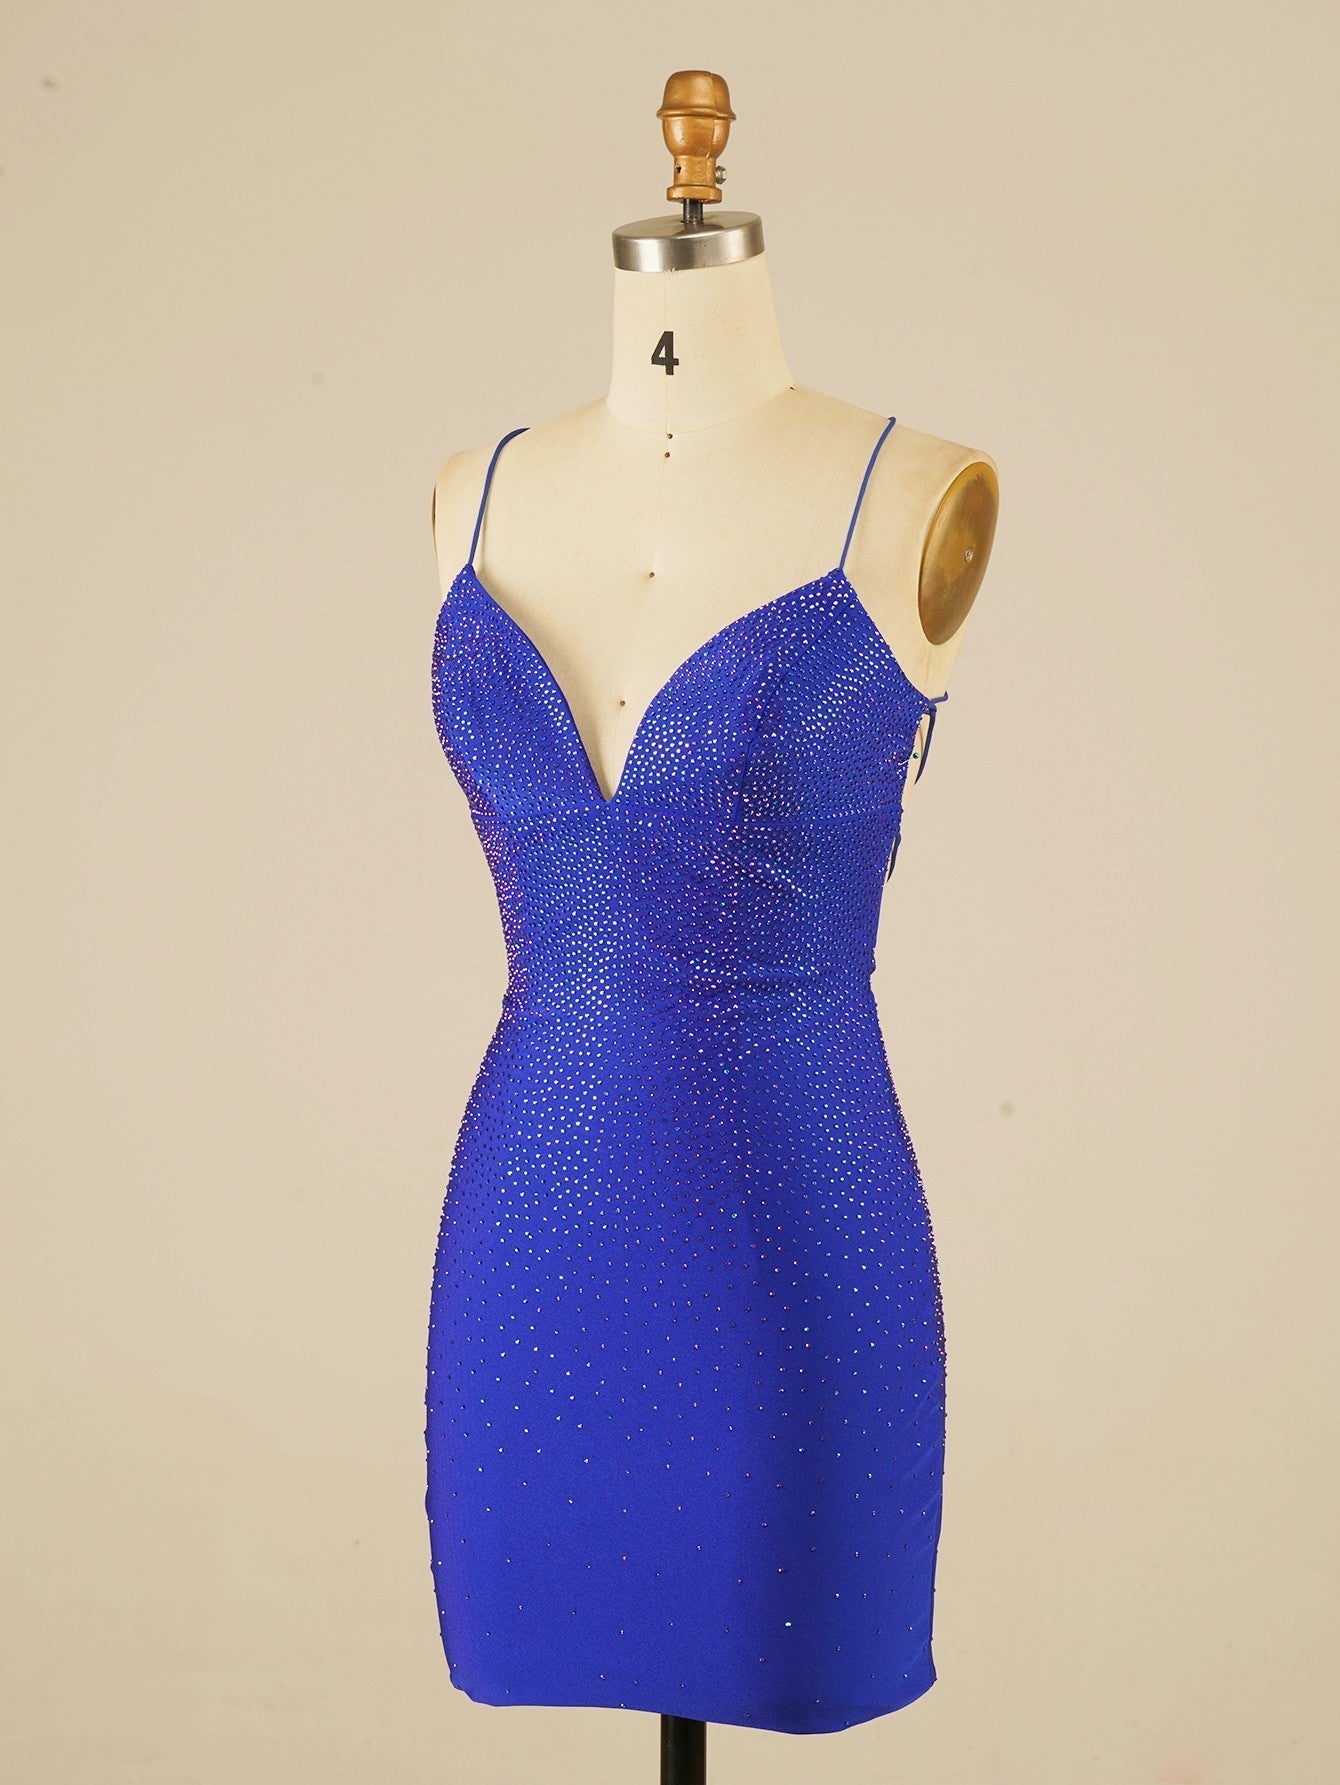 Sequins Tight Blue Short Homecoming Party Dress